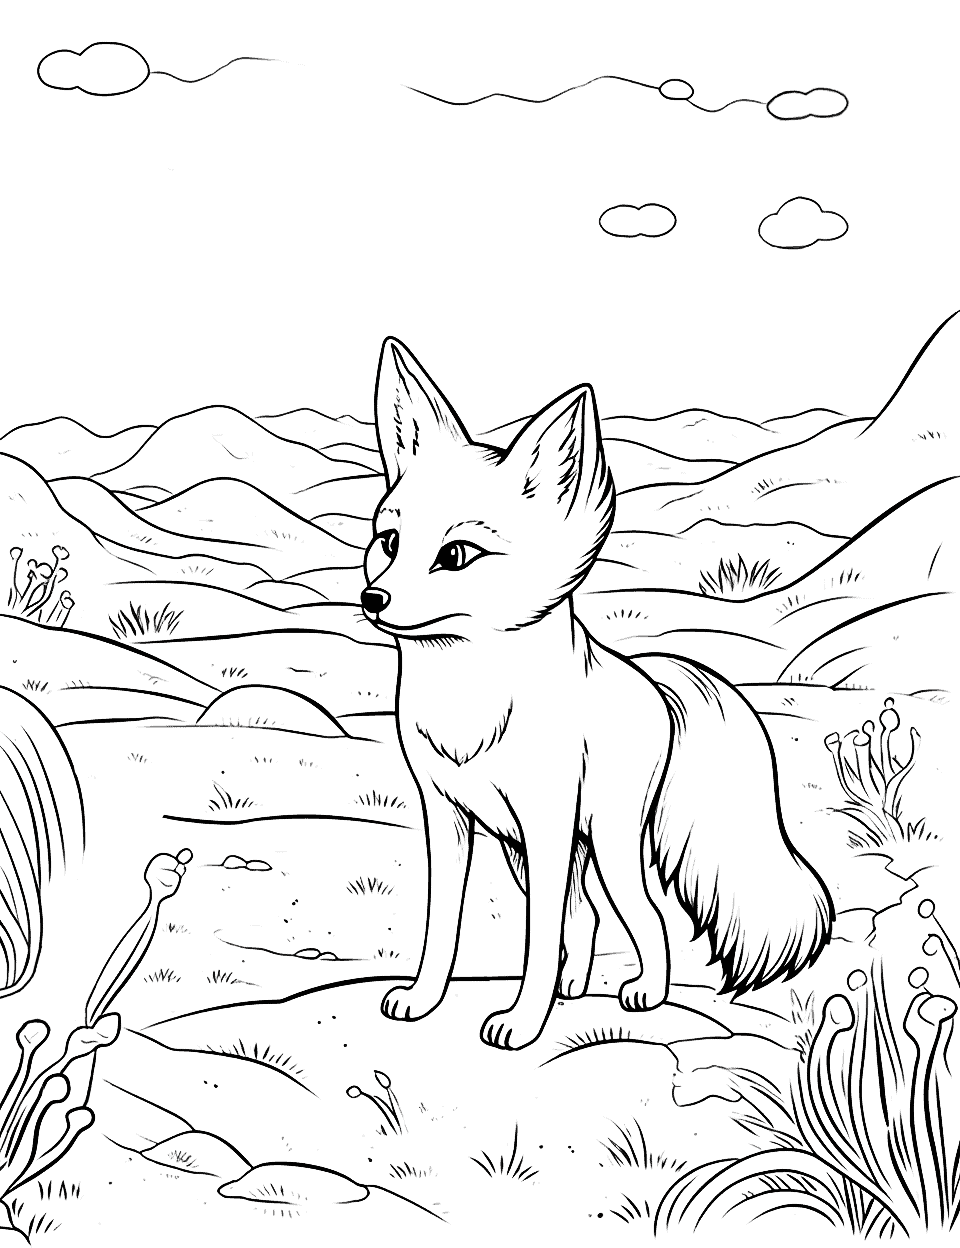 Fox's Desert Oasis Discovery Fox Coloring Page - Fox going around on Desert looking for an Oasis.